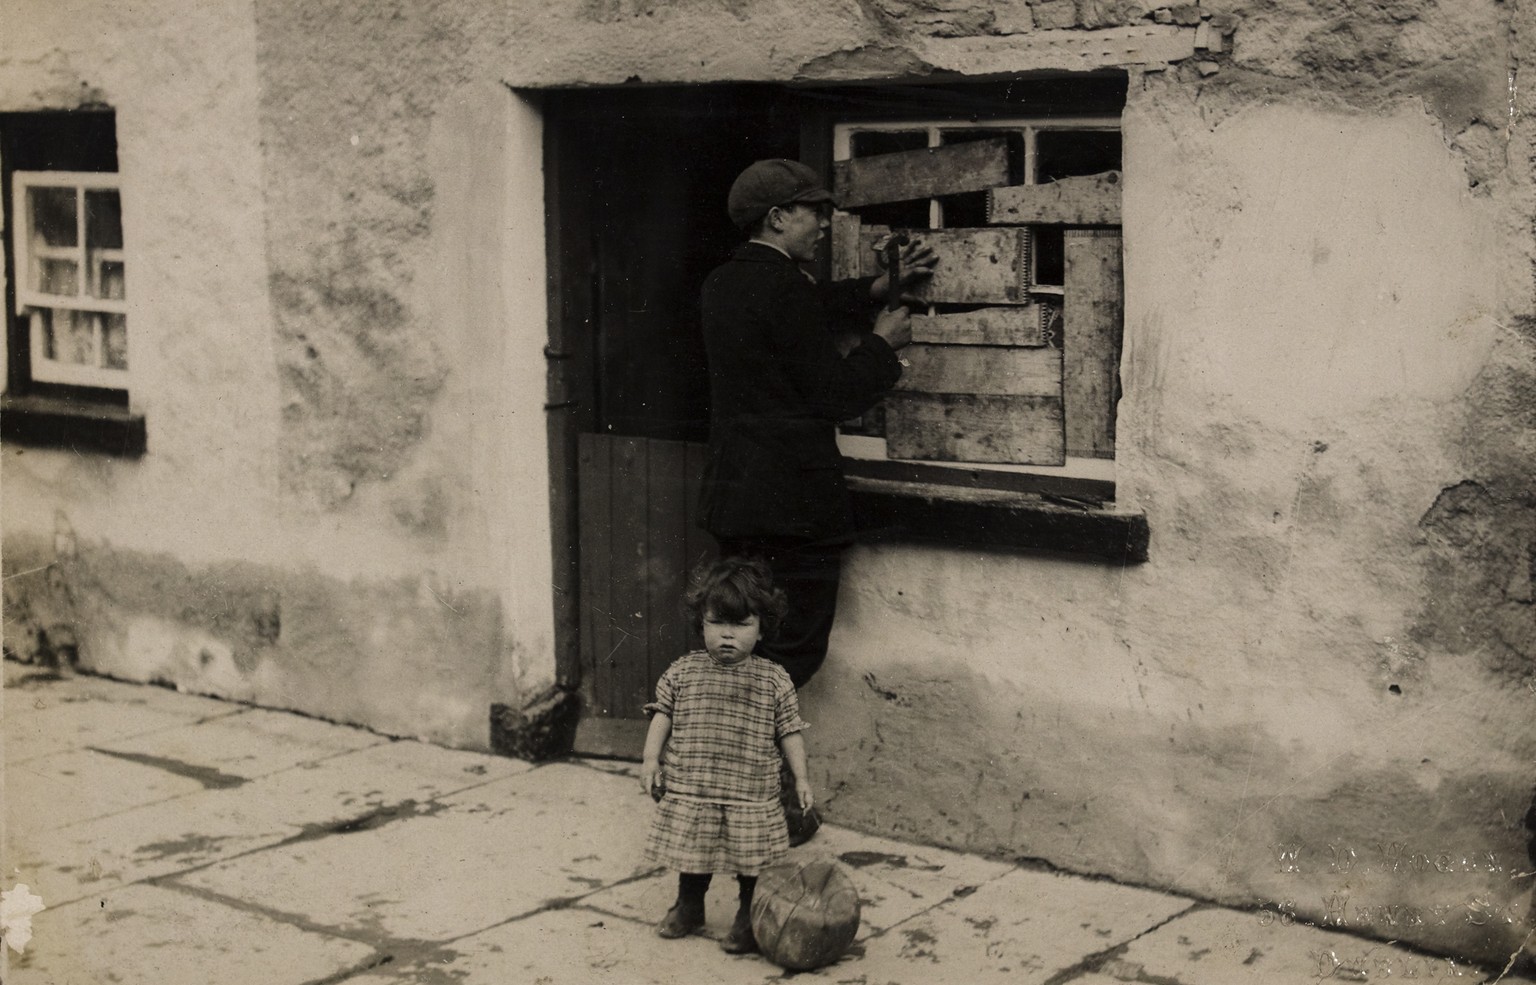 House in Templemore in aftermath of raid by Tans - boy boarding up window and child with a small ball 
This poignant shot shows a young man repairing a house that had apparently been damaged in a raid ...